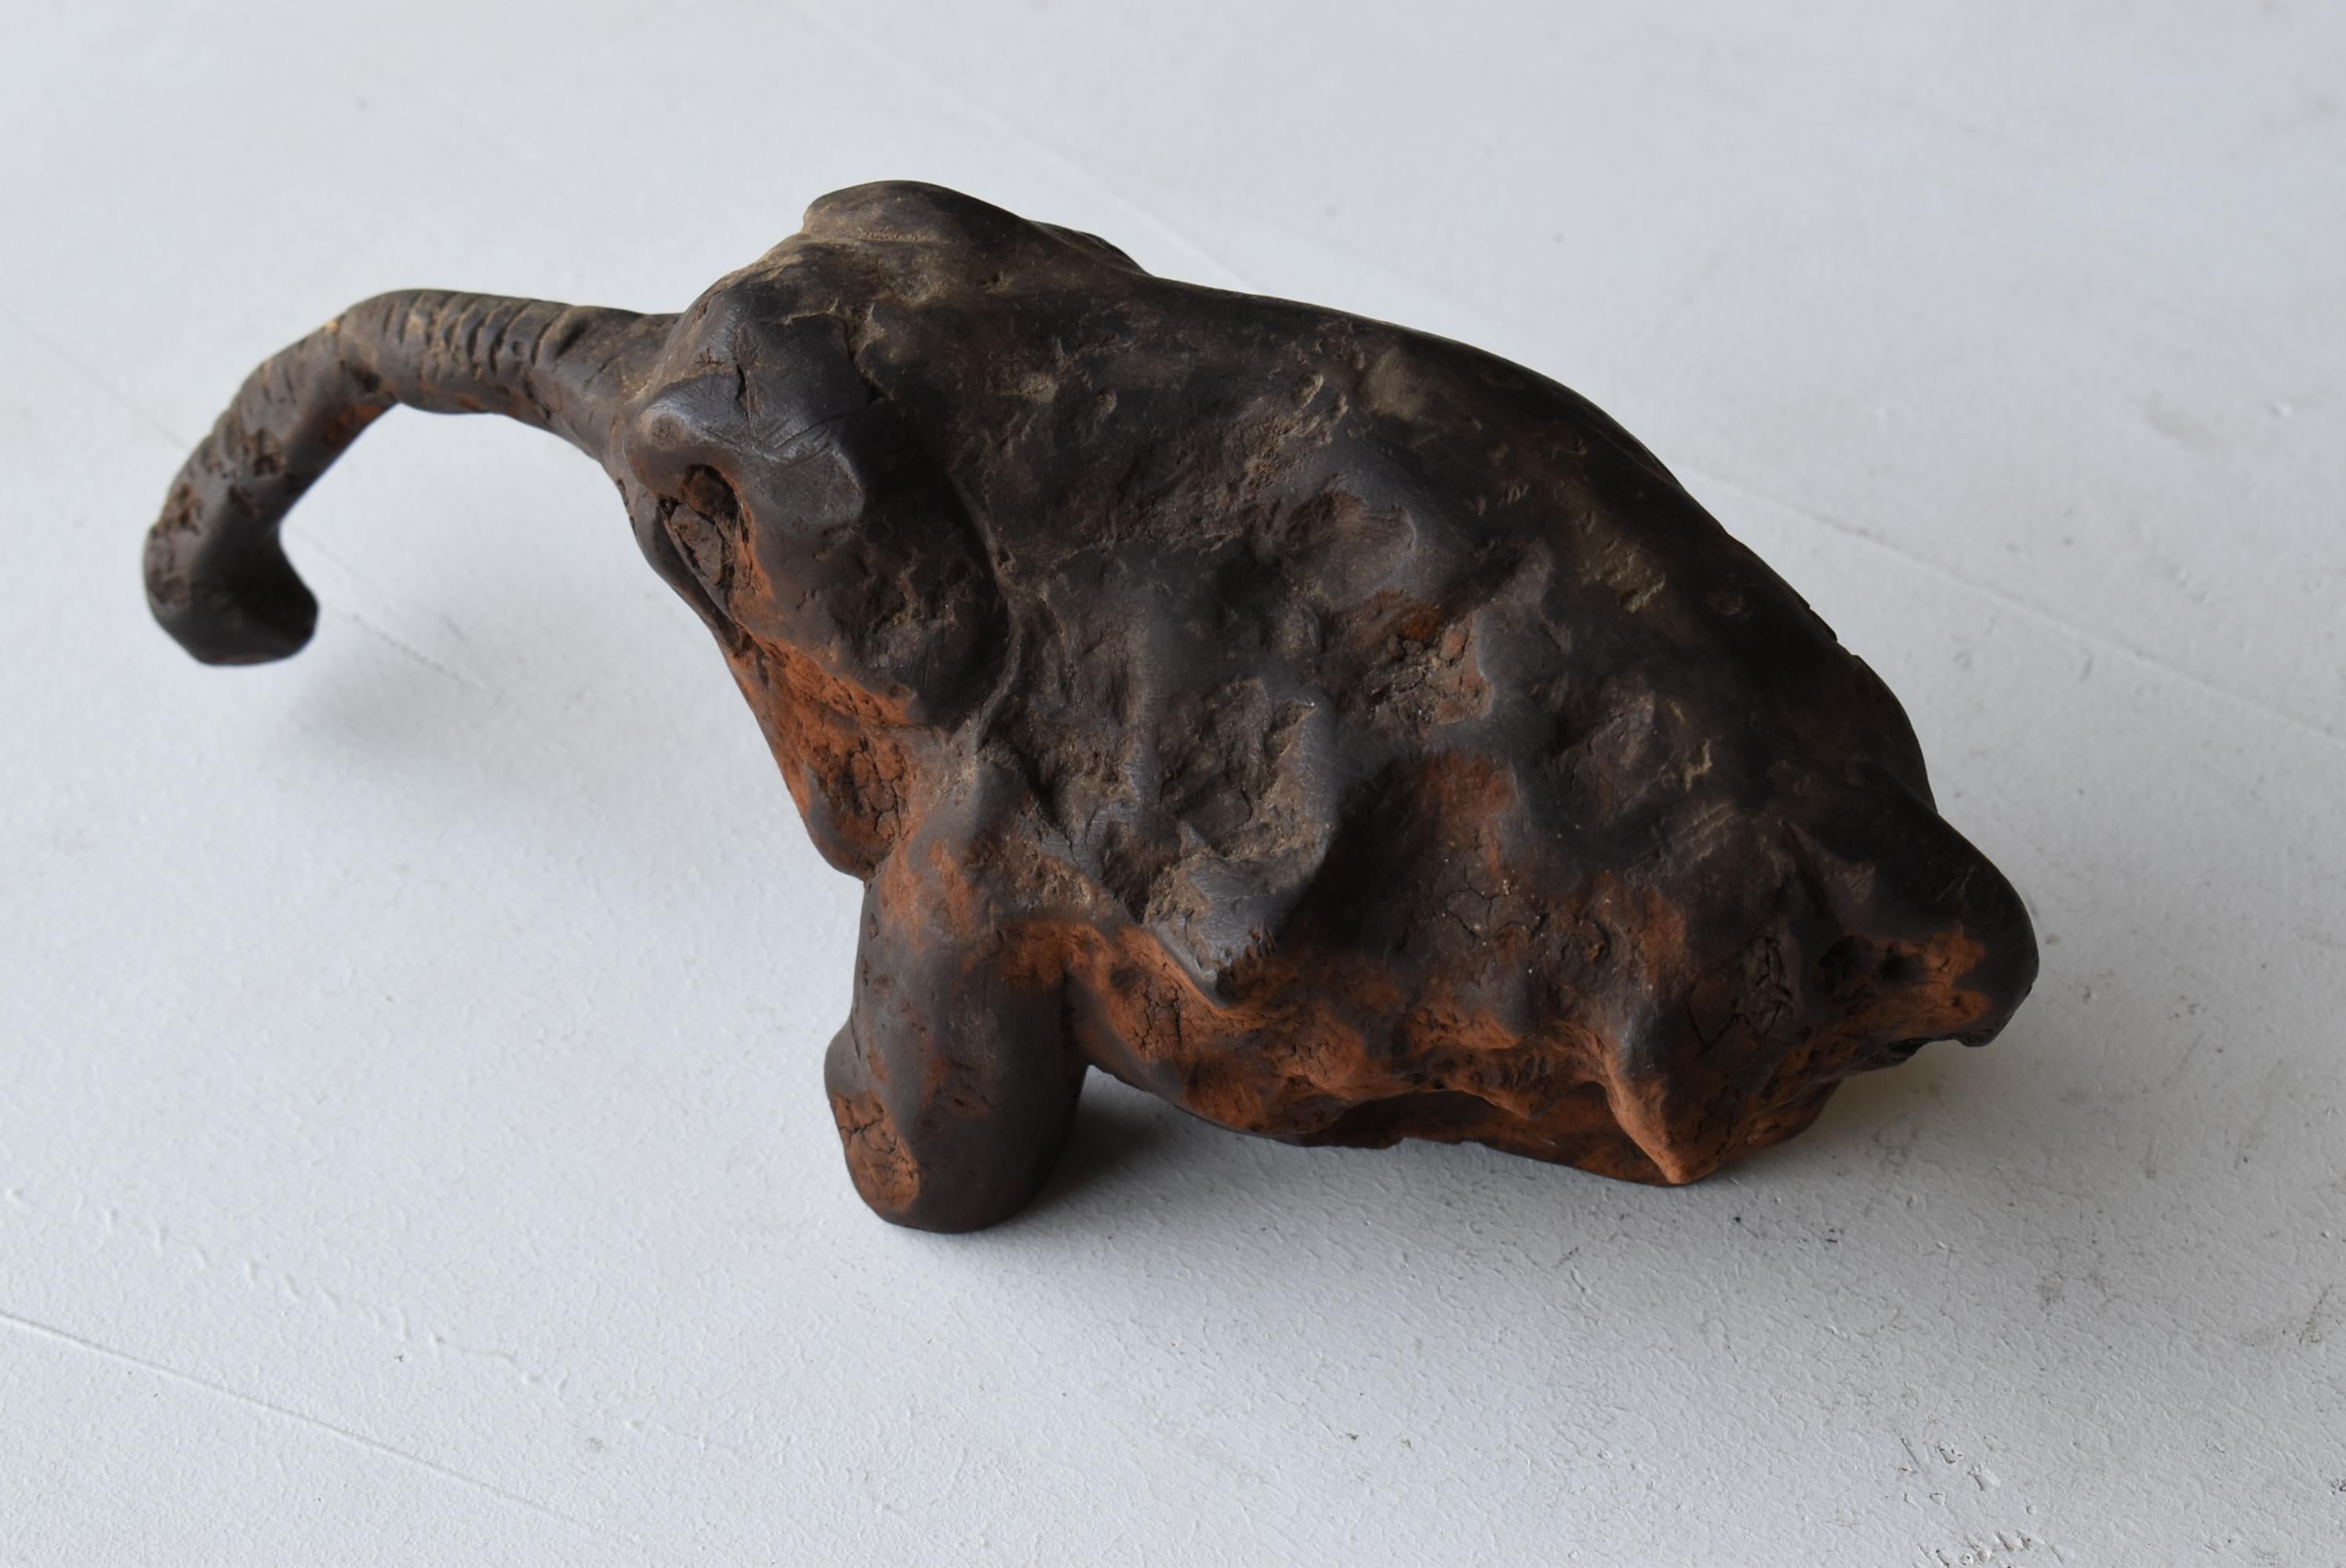 Japanese Antique Wood Carving Elephant 1860s-1920s / Wabi Sabi Sculpture Object In Good Condition For Sale In Sammu-shi, Chiba